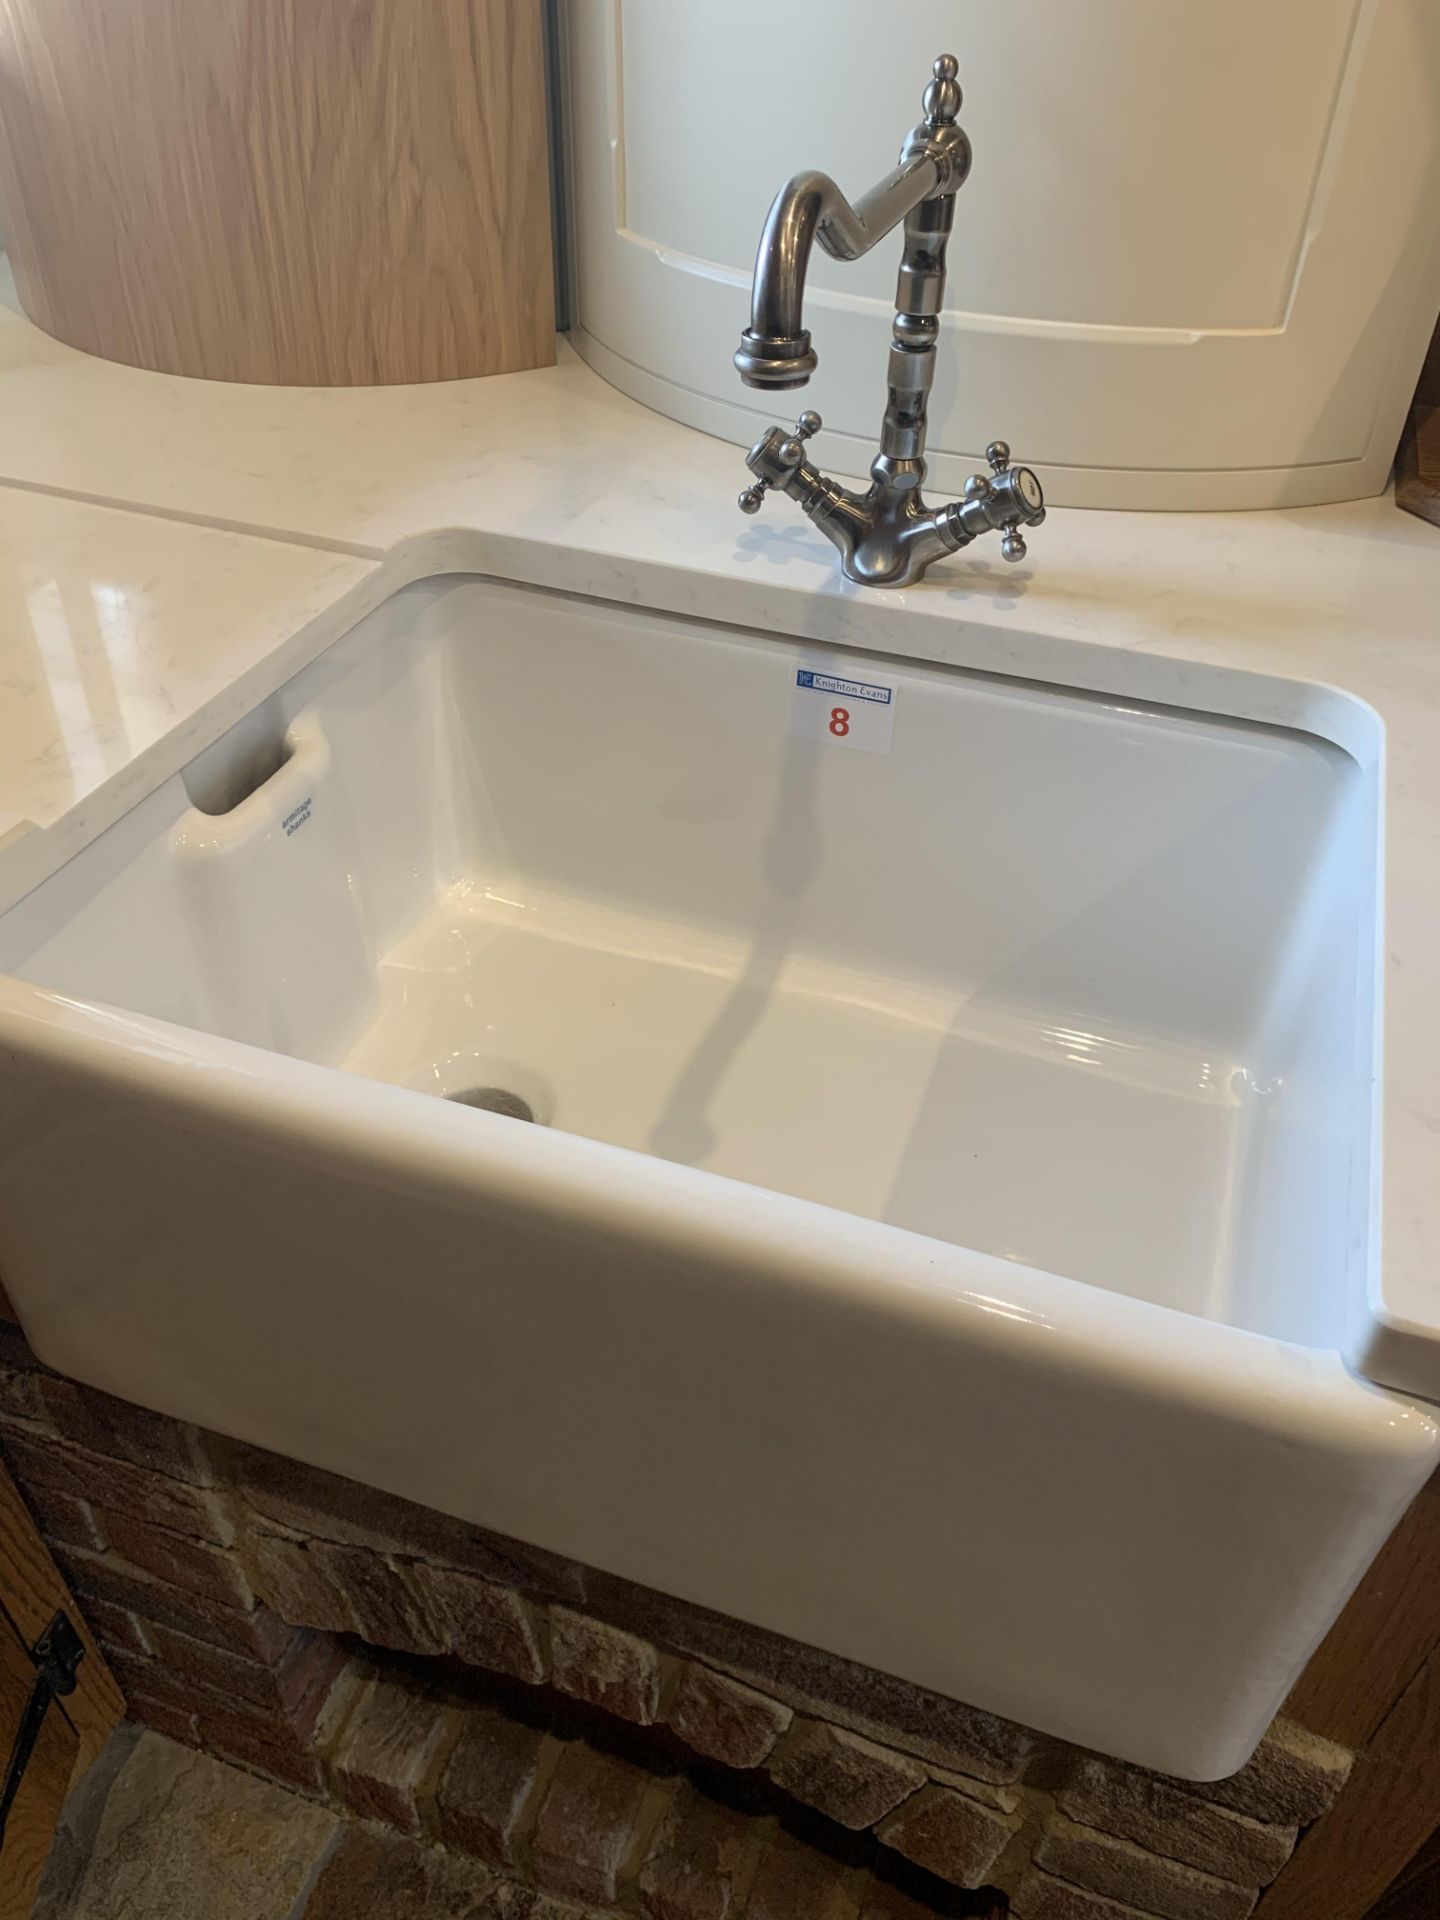 Armitage shanks Belfast sink with traditional mixer tap